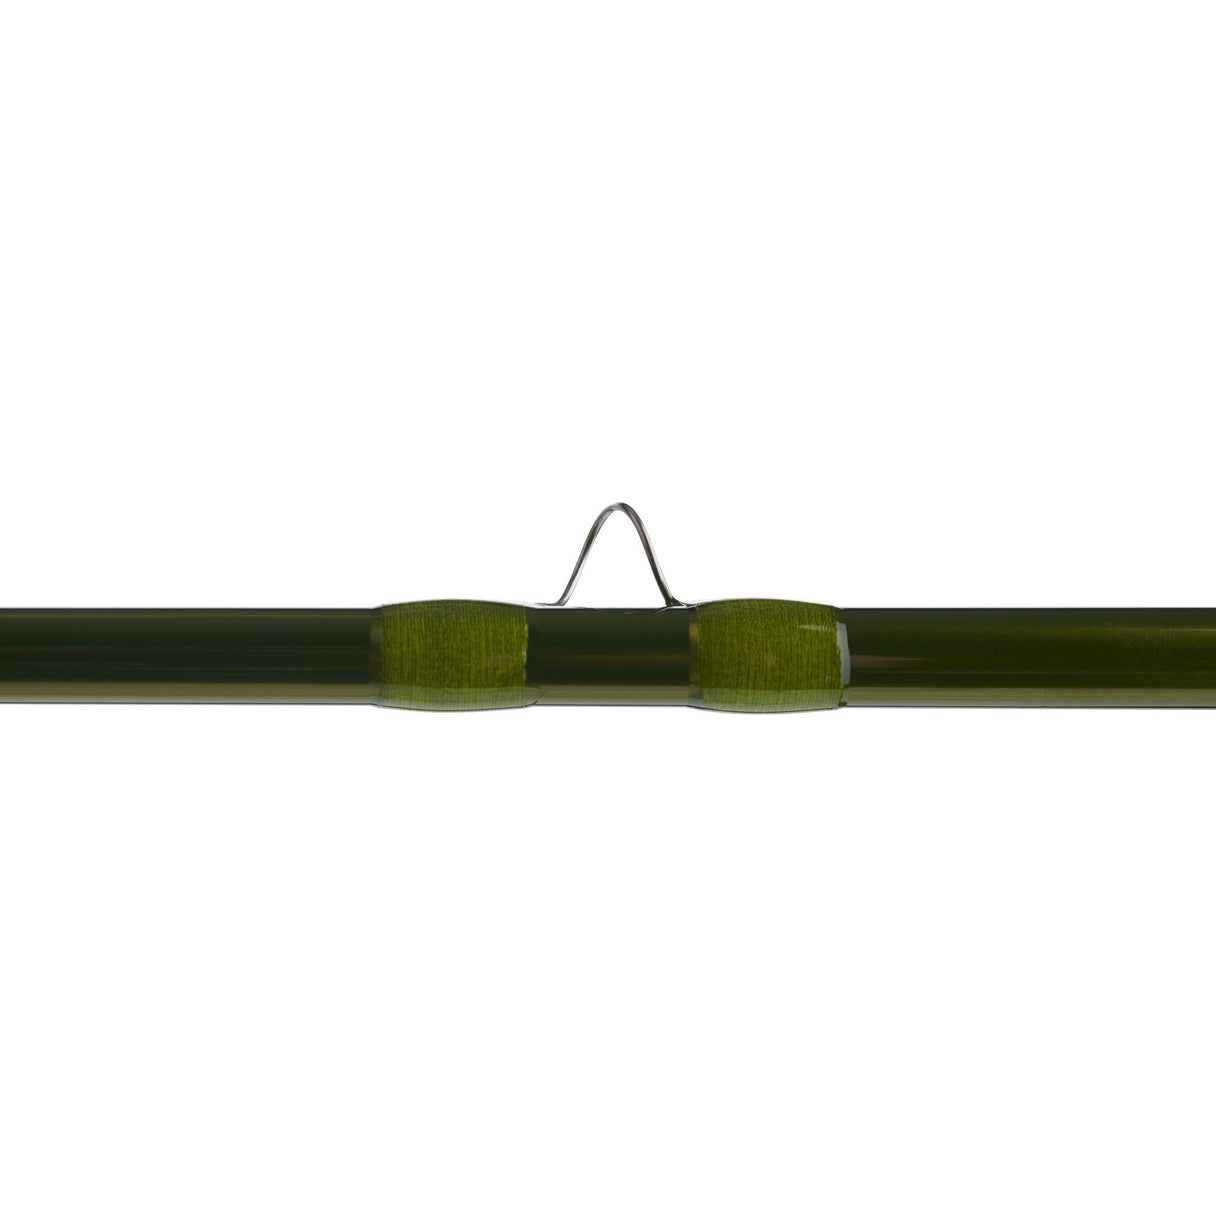 Hardy Ultralite NSX DH Fly Rod